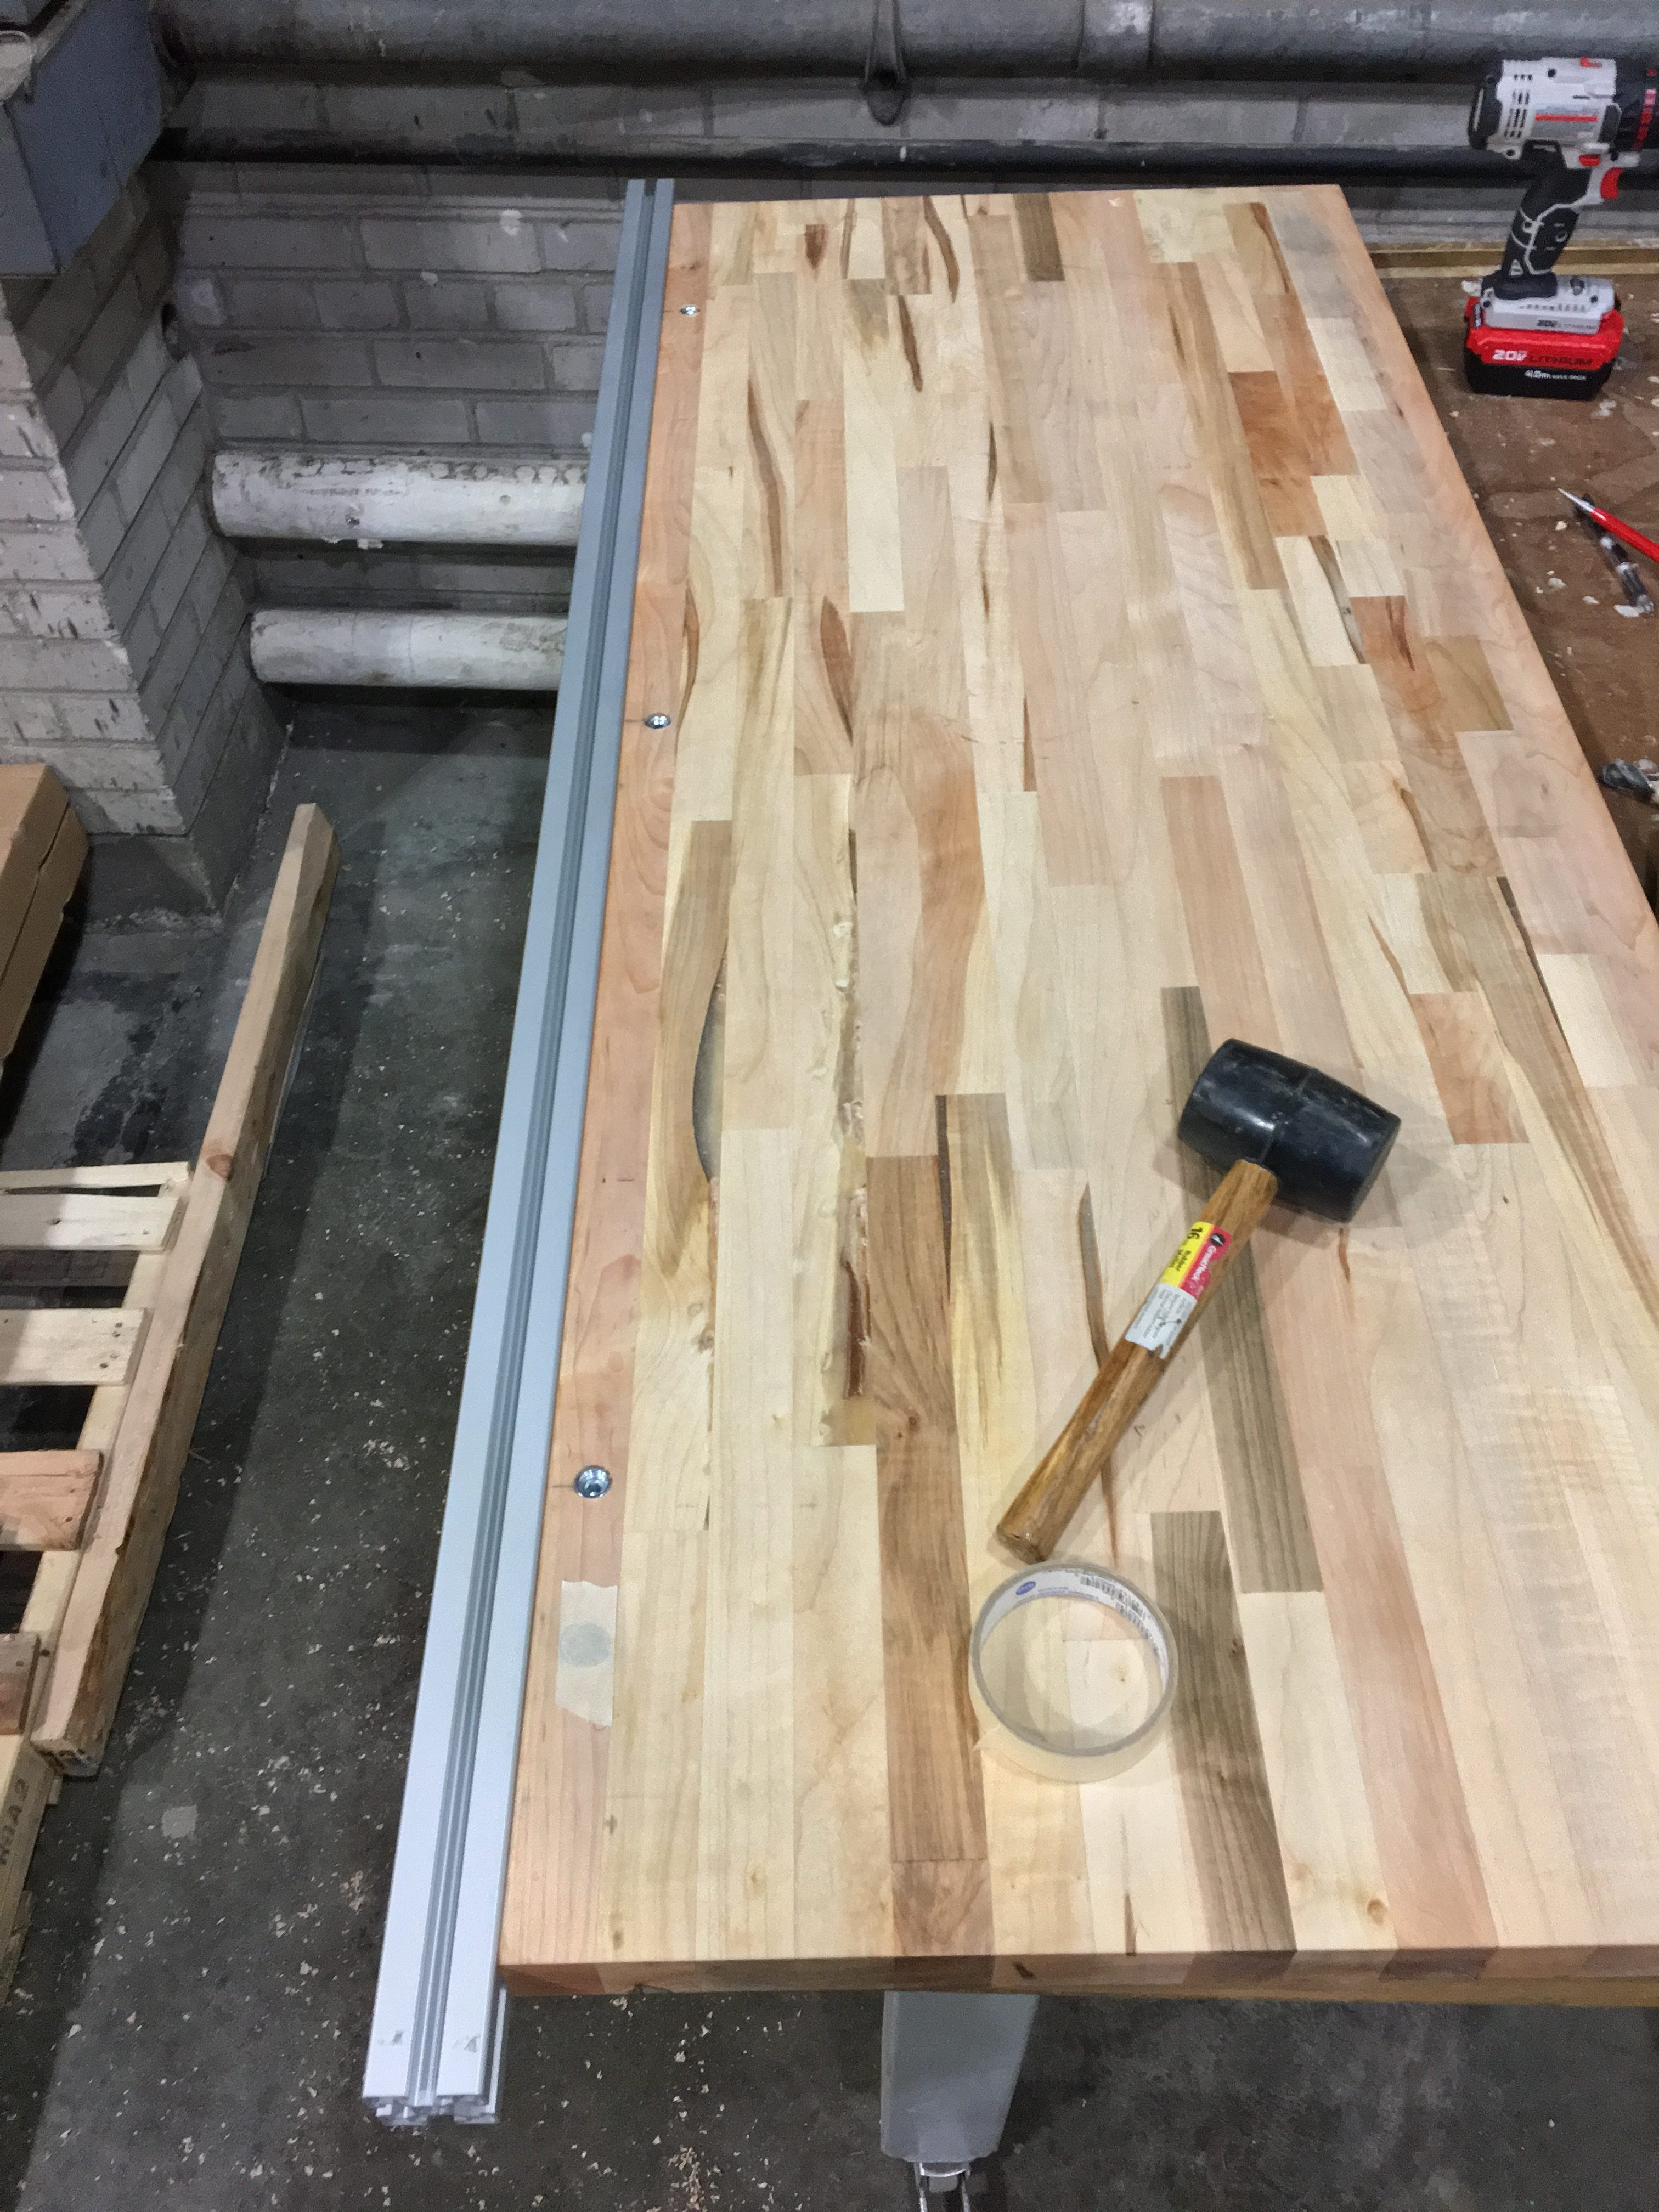 Hardwood Floor Transition to Sliding Door Of Service Hydrogen Properties for Energy Research Hyper Laboratory within Next Slide Pieces D1 and D2 On Either Side Of the Maple Block while the T Bolts are Threaded Through the Bosch Tube Tighten Using the 8 Mm Allen Wrench